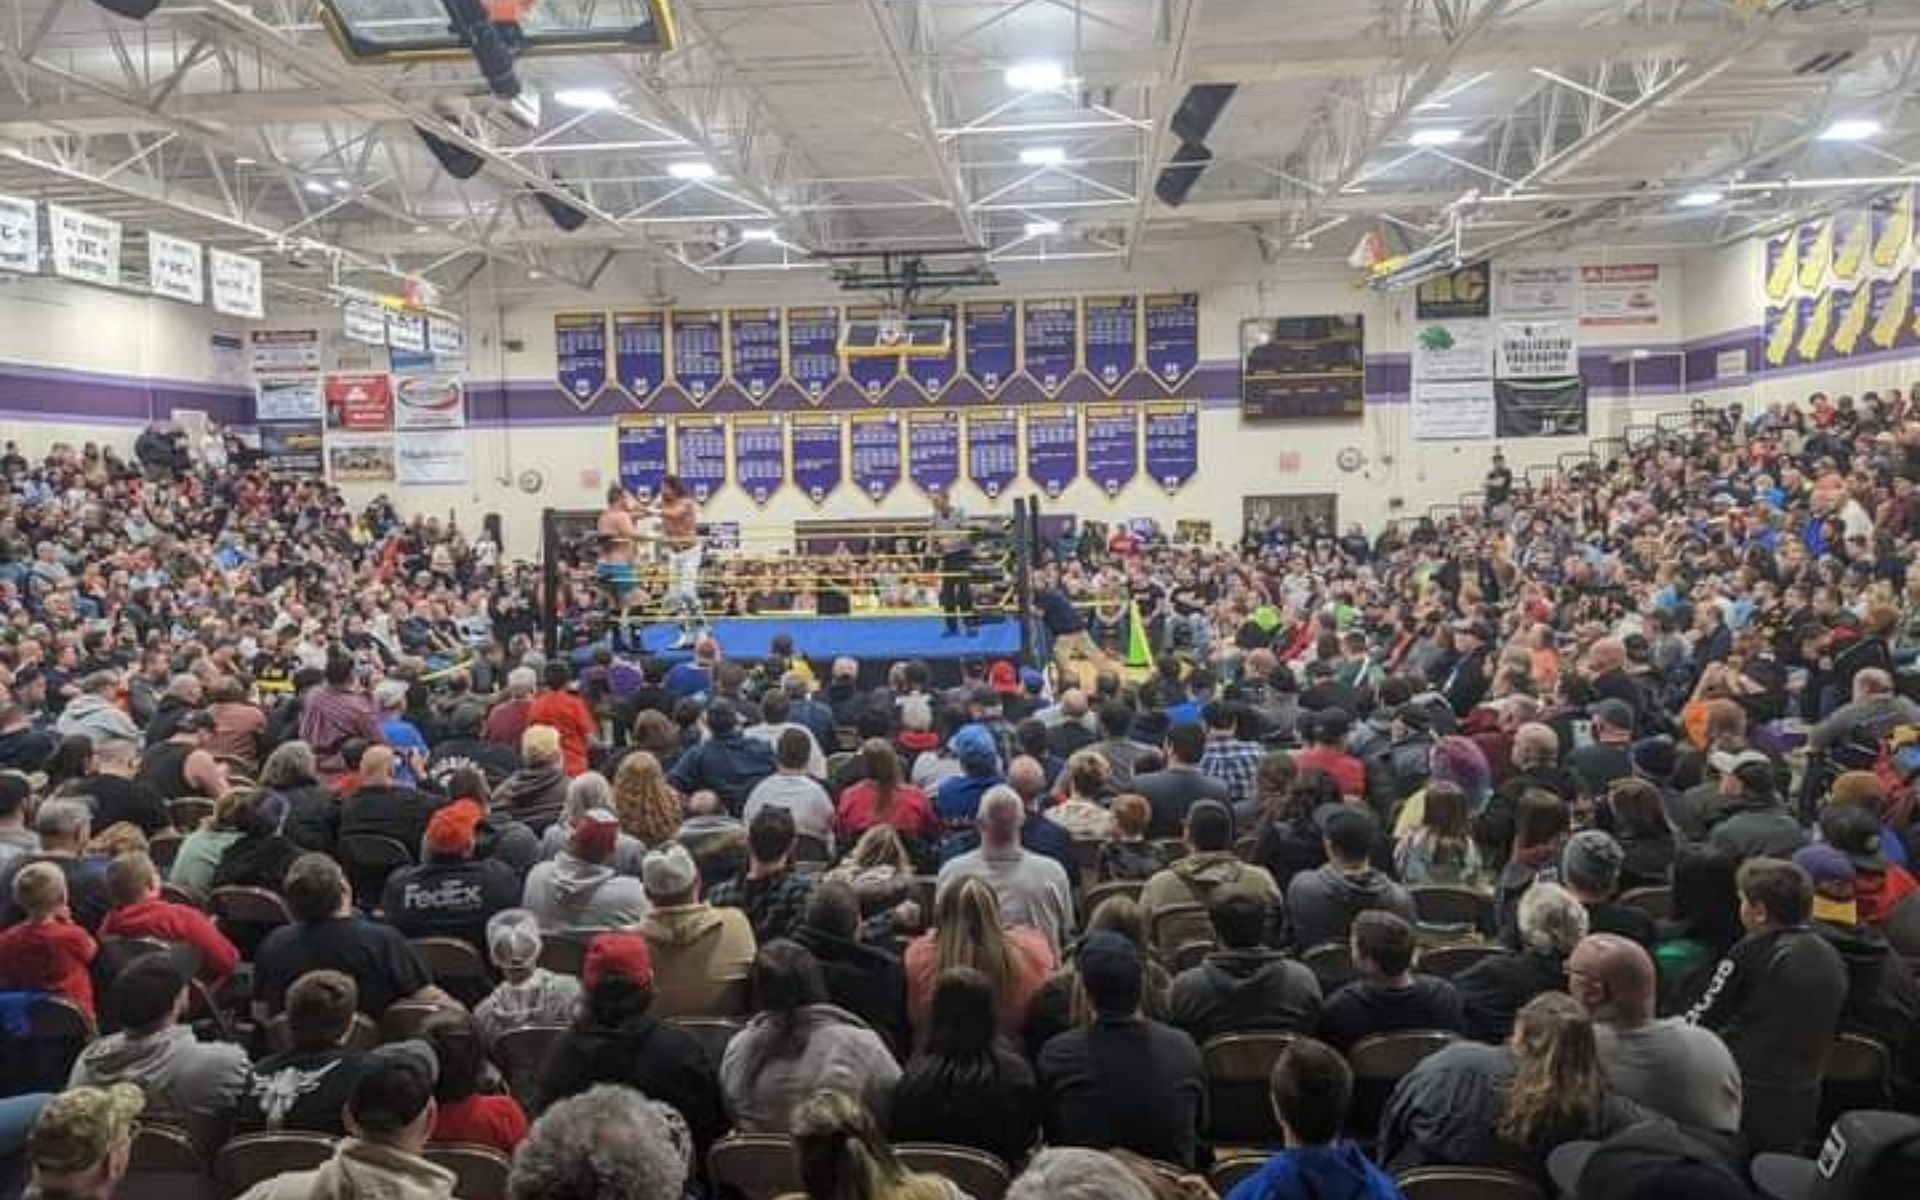 Over 3,000 fans packed the venue for a Big Time Wrestling event in 2022!